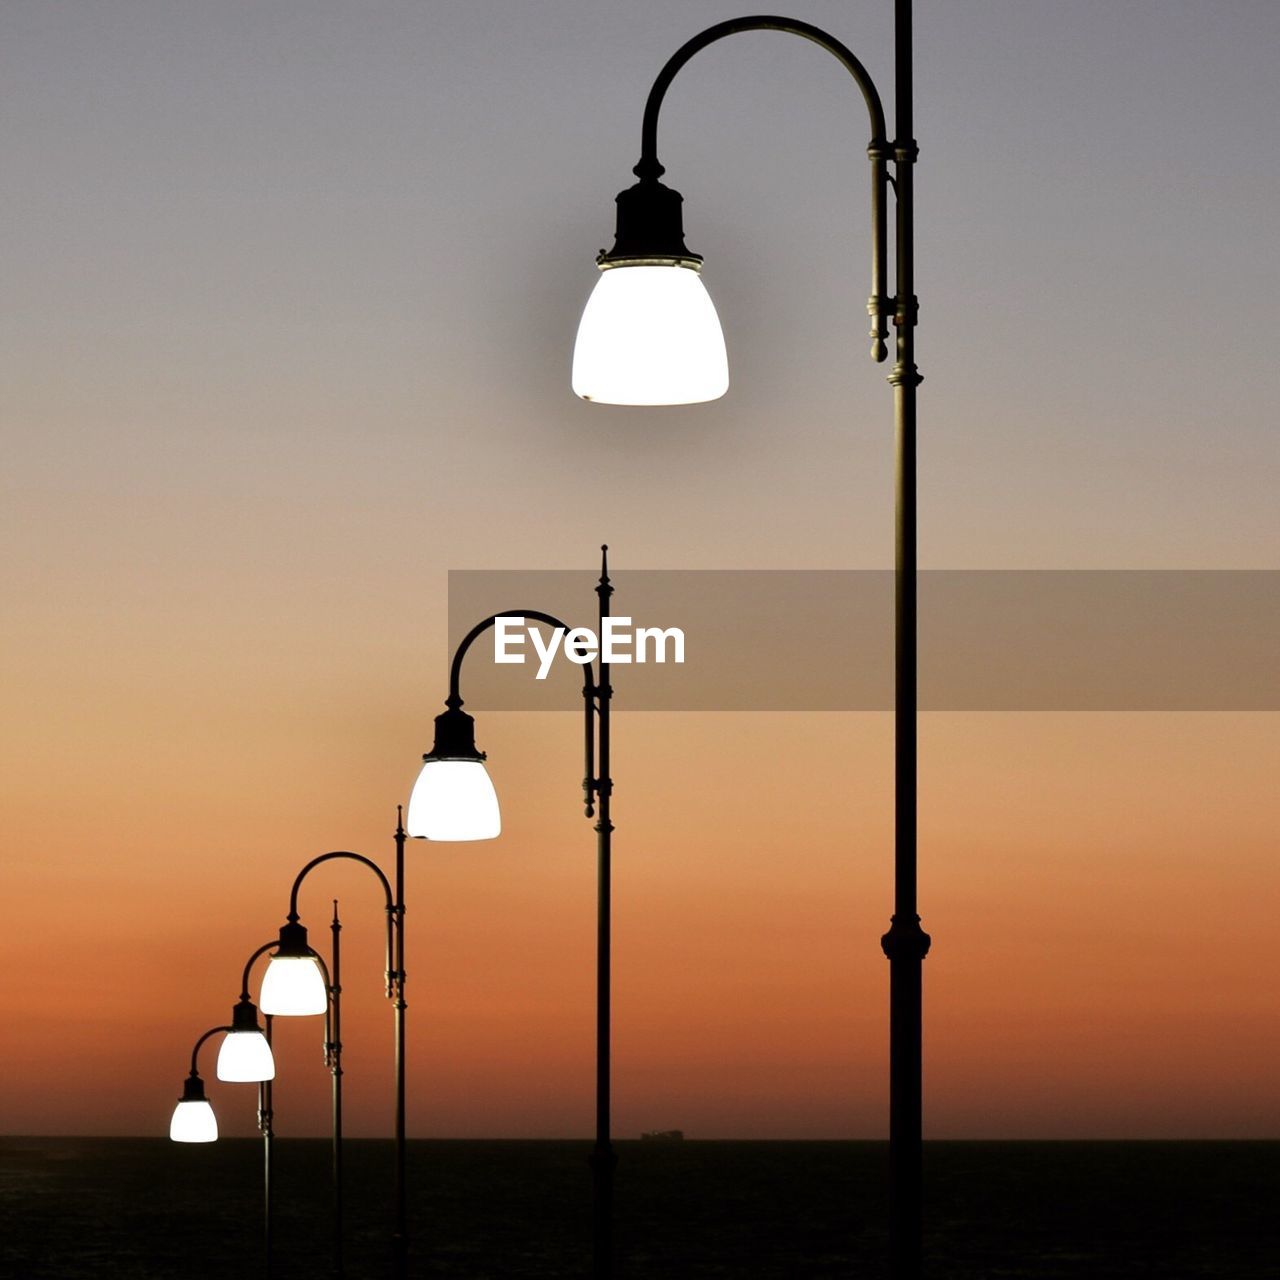 Illuminated street lights against clear sky during sunset